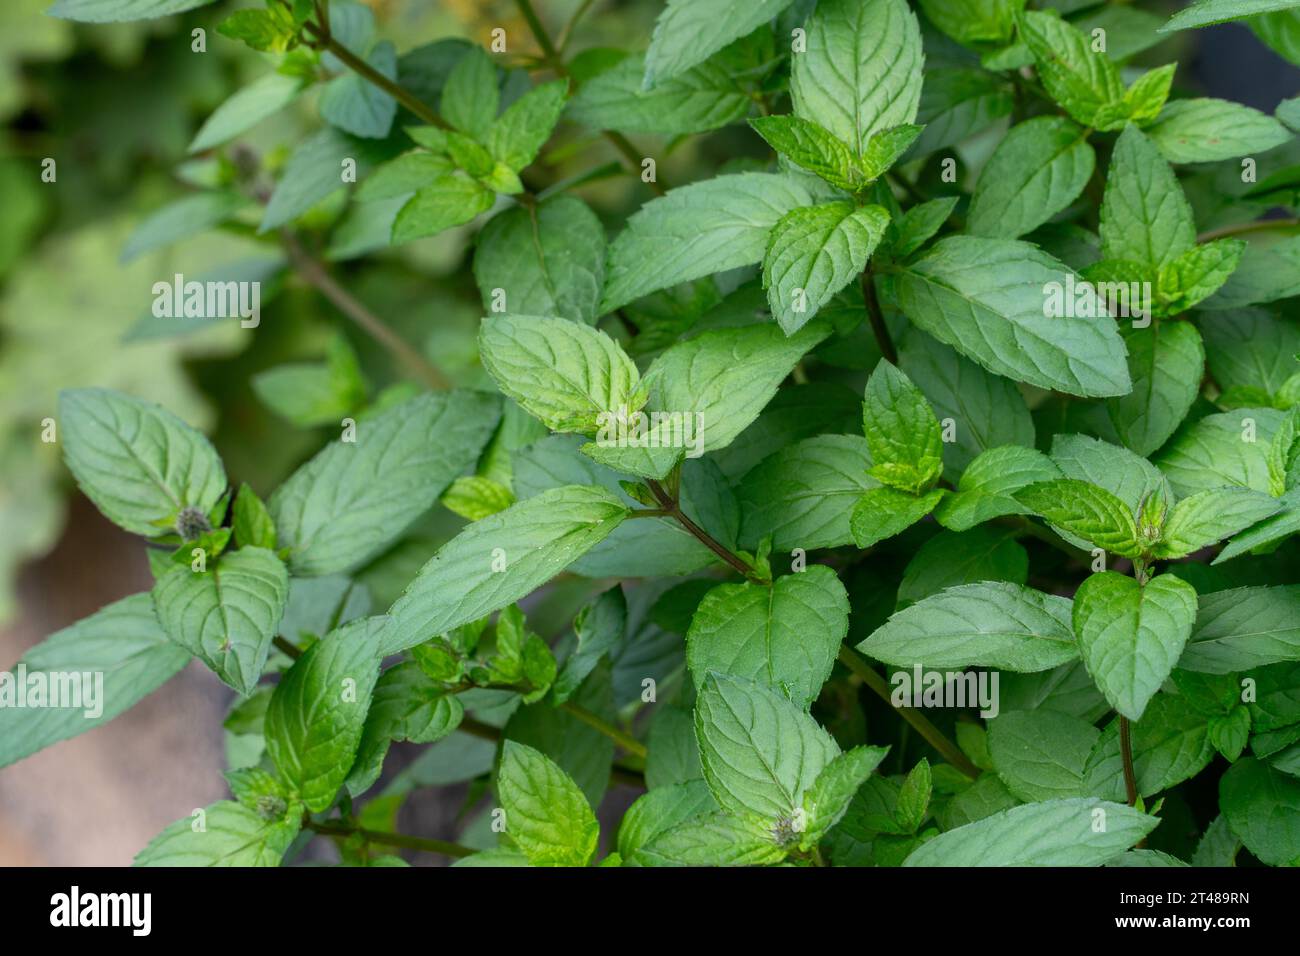 Close-up view of peppermint plant stems adorned with vibrant green leaves. This aromatic herb is commonly used as a food spice and has a long history Stock Photo